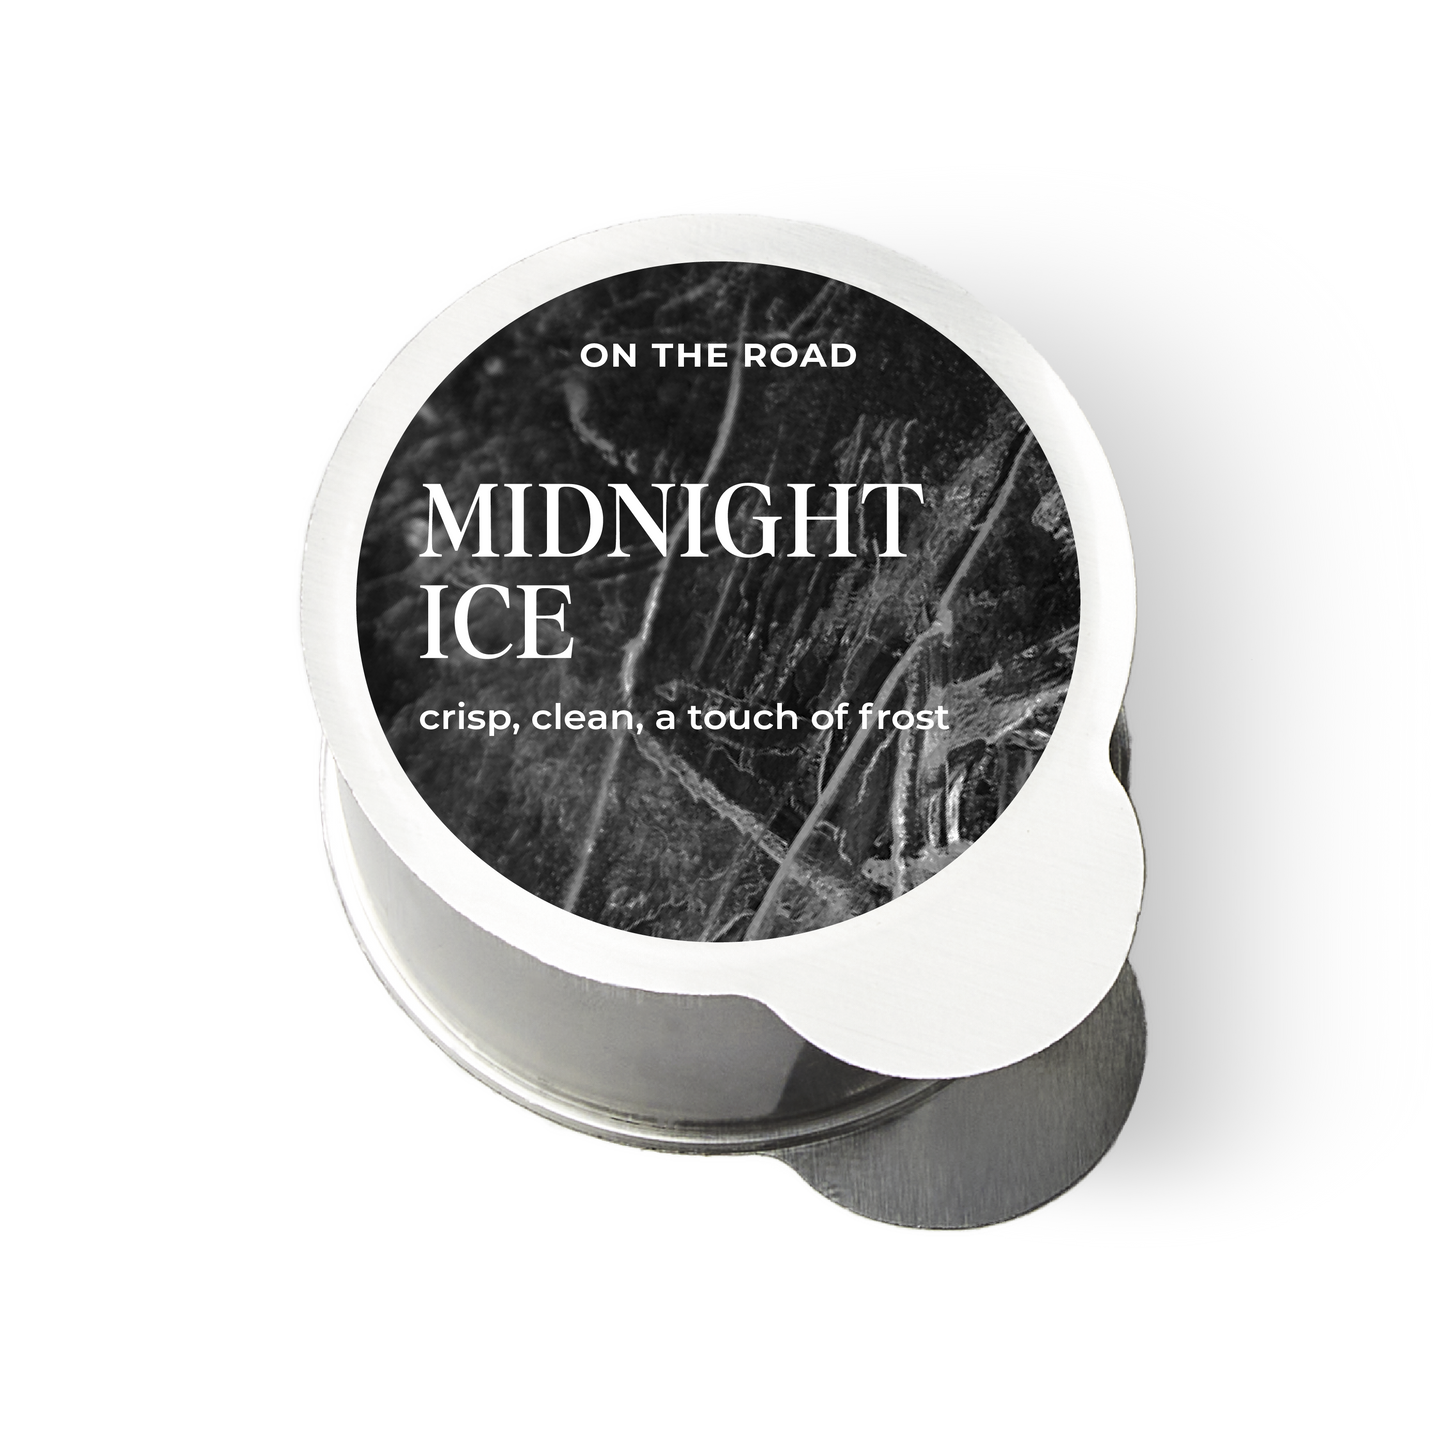 Midnight Ice - On the Road - MojiLife